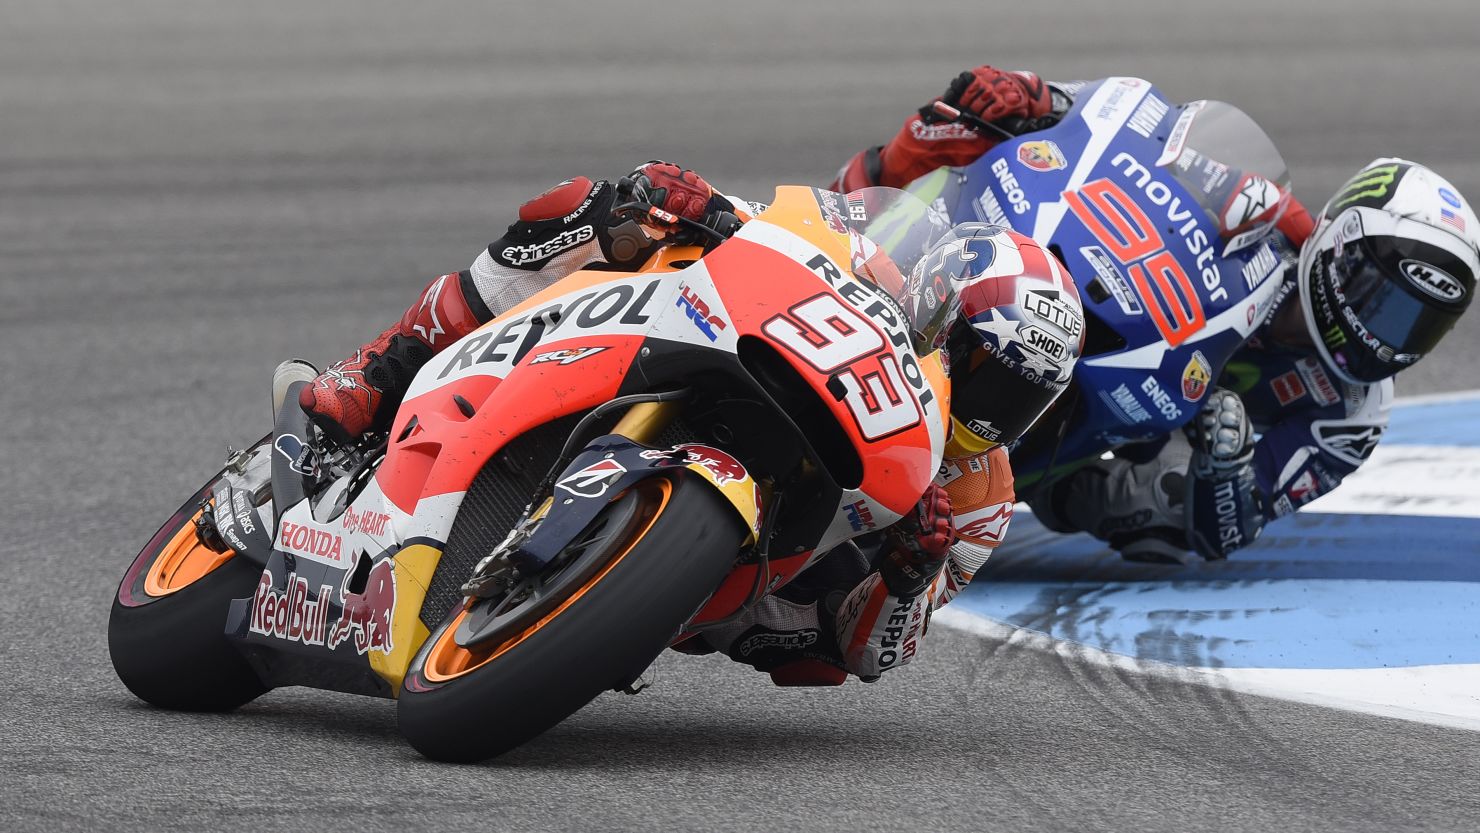 Reigning world champion Marc Marquez takes the lead from compatriot Jorge Lorenzo